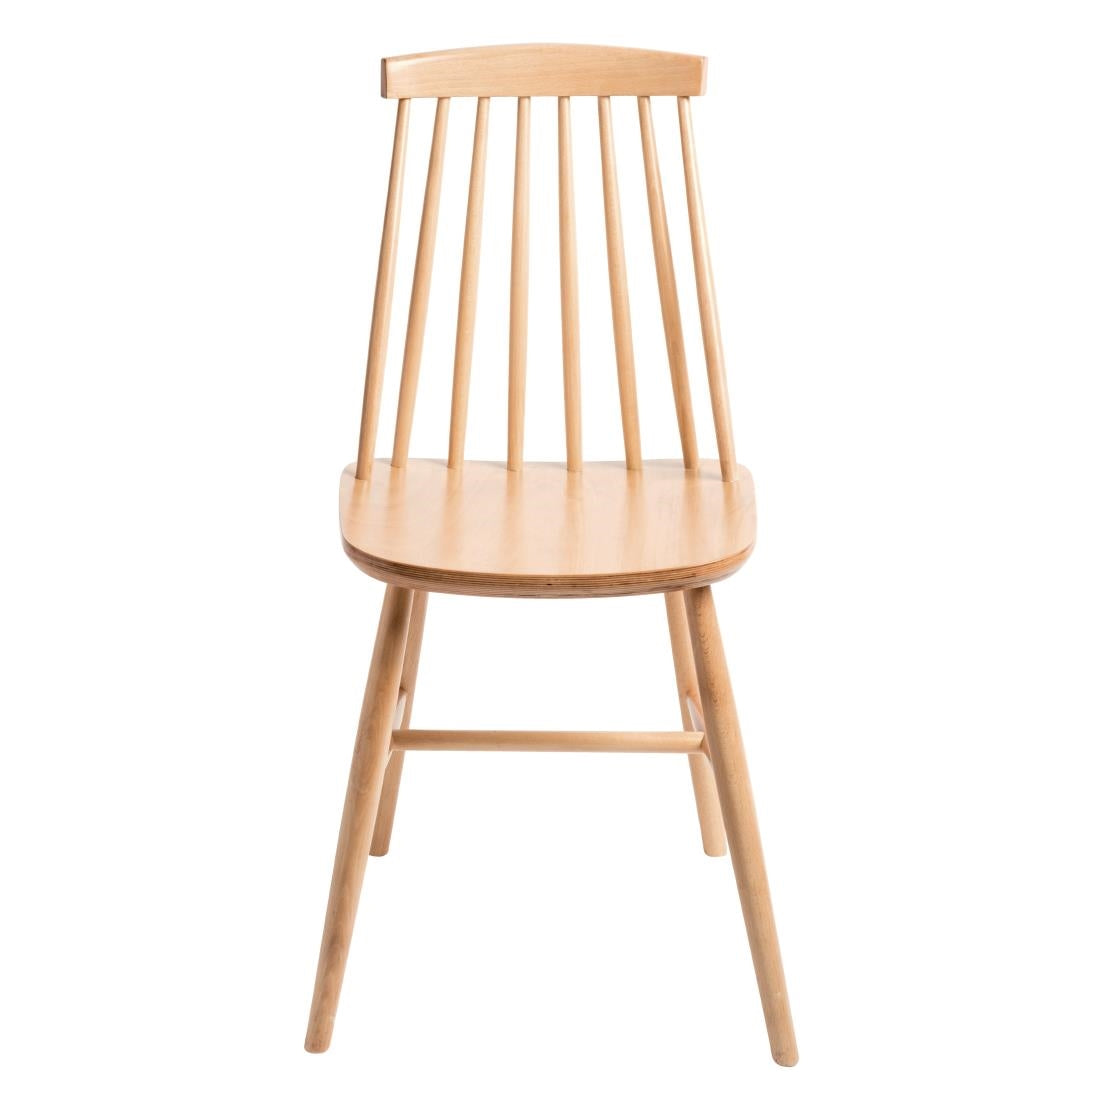 DC353 Fameg Farmhouse Angled Side Chairs Natural Beech (Pack of 2) JD Catering Equipment Solutions Ltd